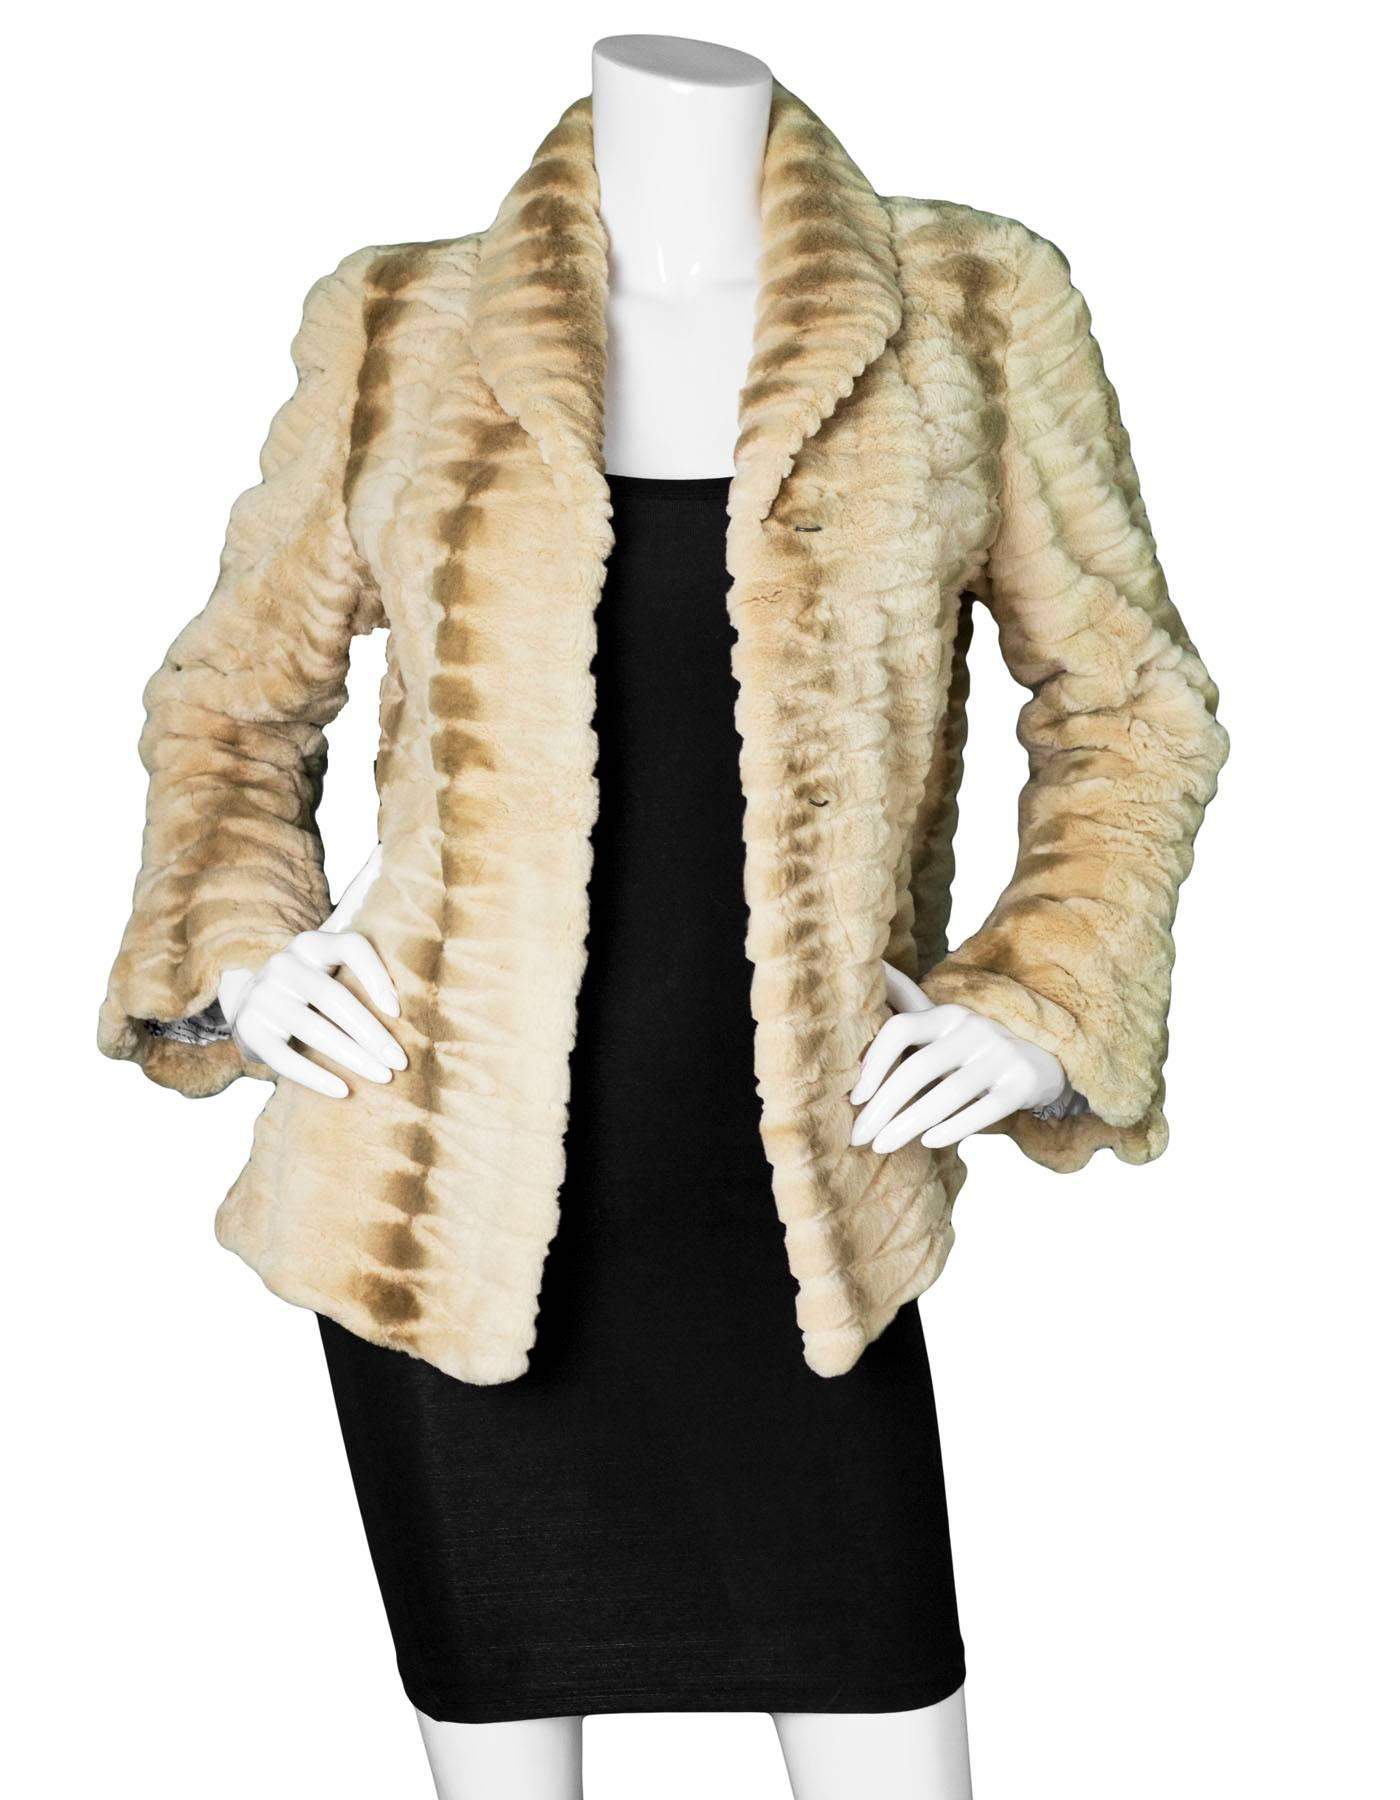 Sageo Beige Rabbit Fur Jacket Sz S

Color: Beige
Composition: 100% fur
Lining: Print textle
Closure/Opening: Front hook and eye closures
Exterior Pockets: Two hip pockets
Interior Pockets: None
Overall Condition: Excellent pre-owned condition
Marked